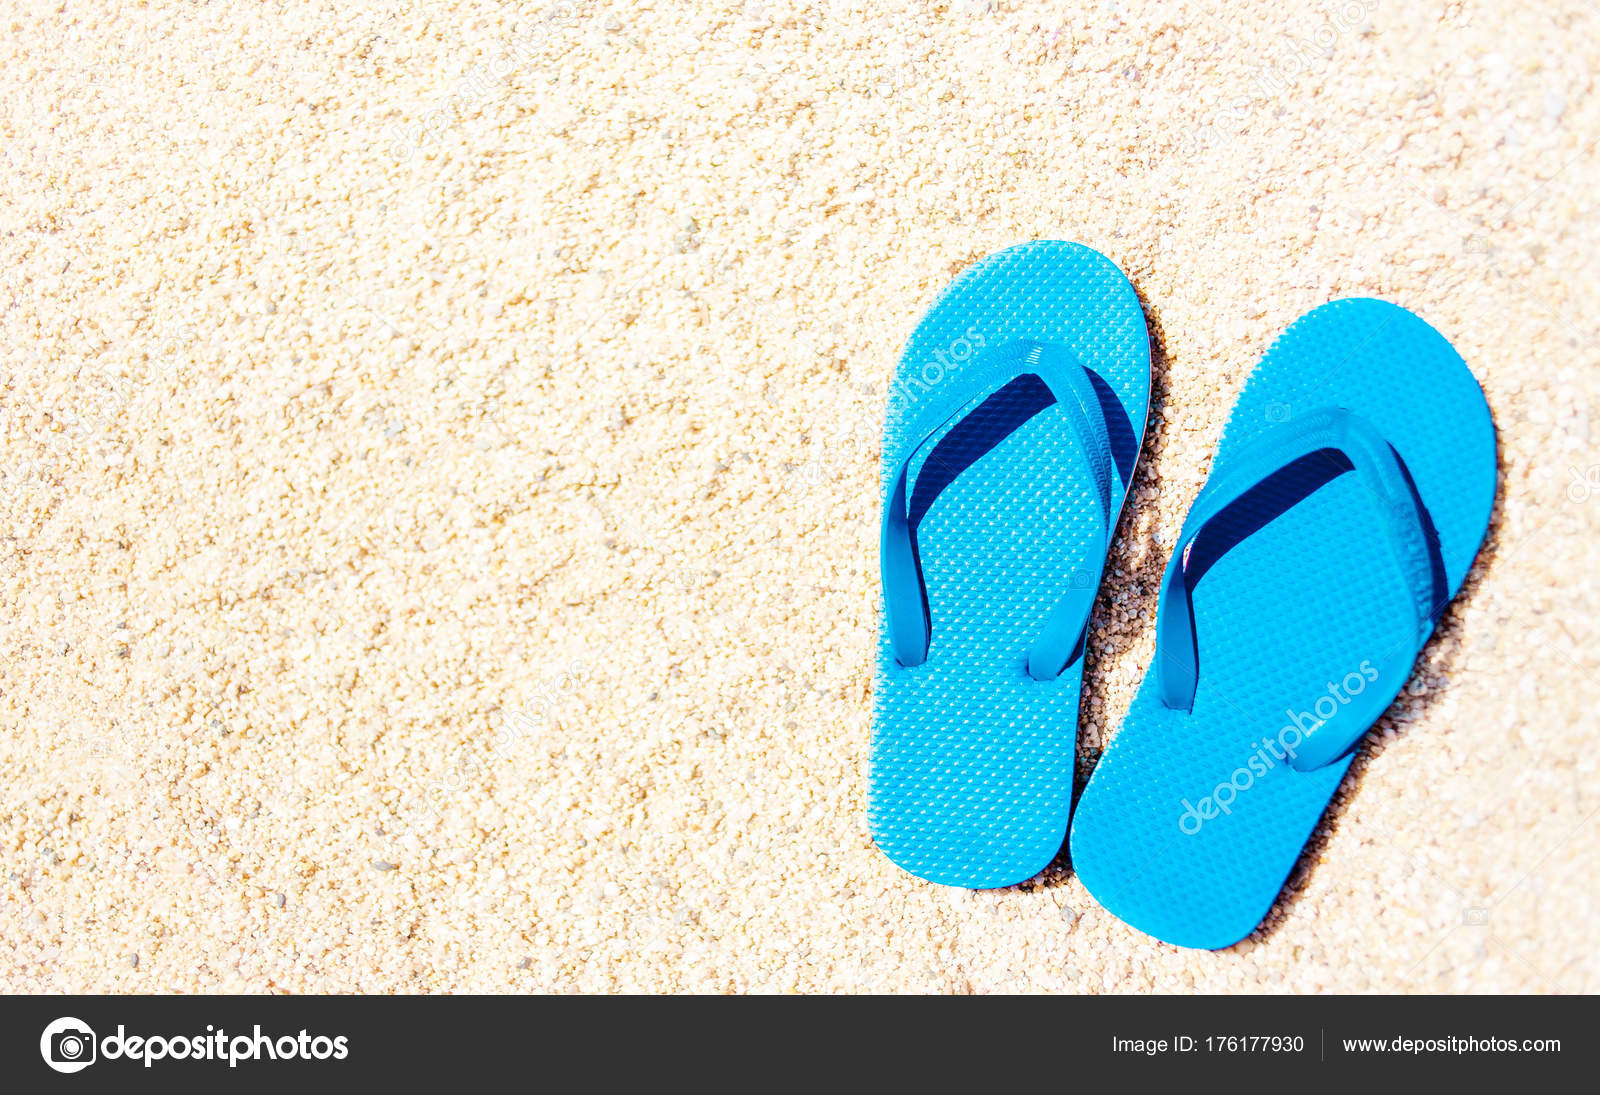 342 Stylish Beautiful Slippers Sand On Sea Background Images, Stock Photos,  3D objects, & Vectors | Shutterstock